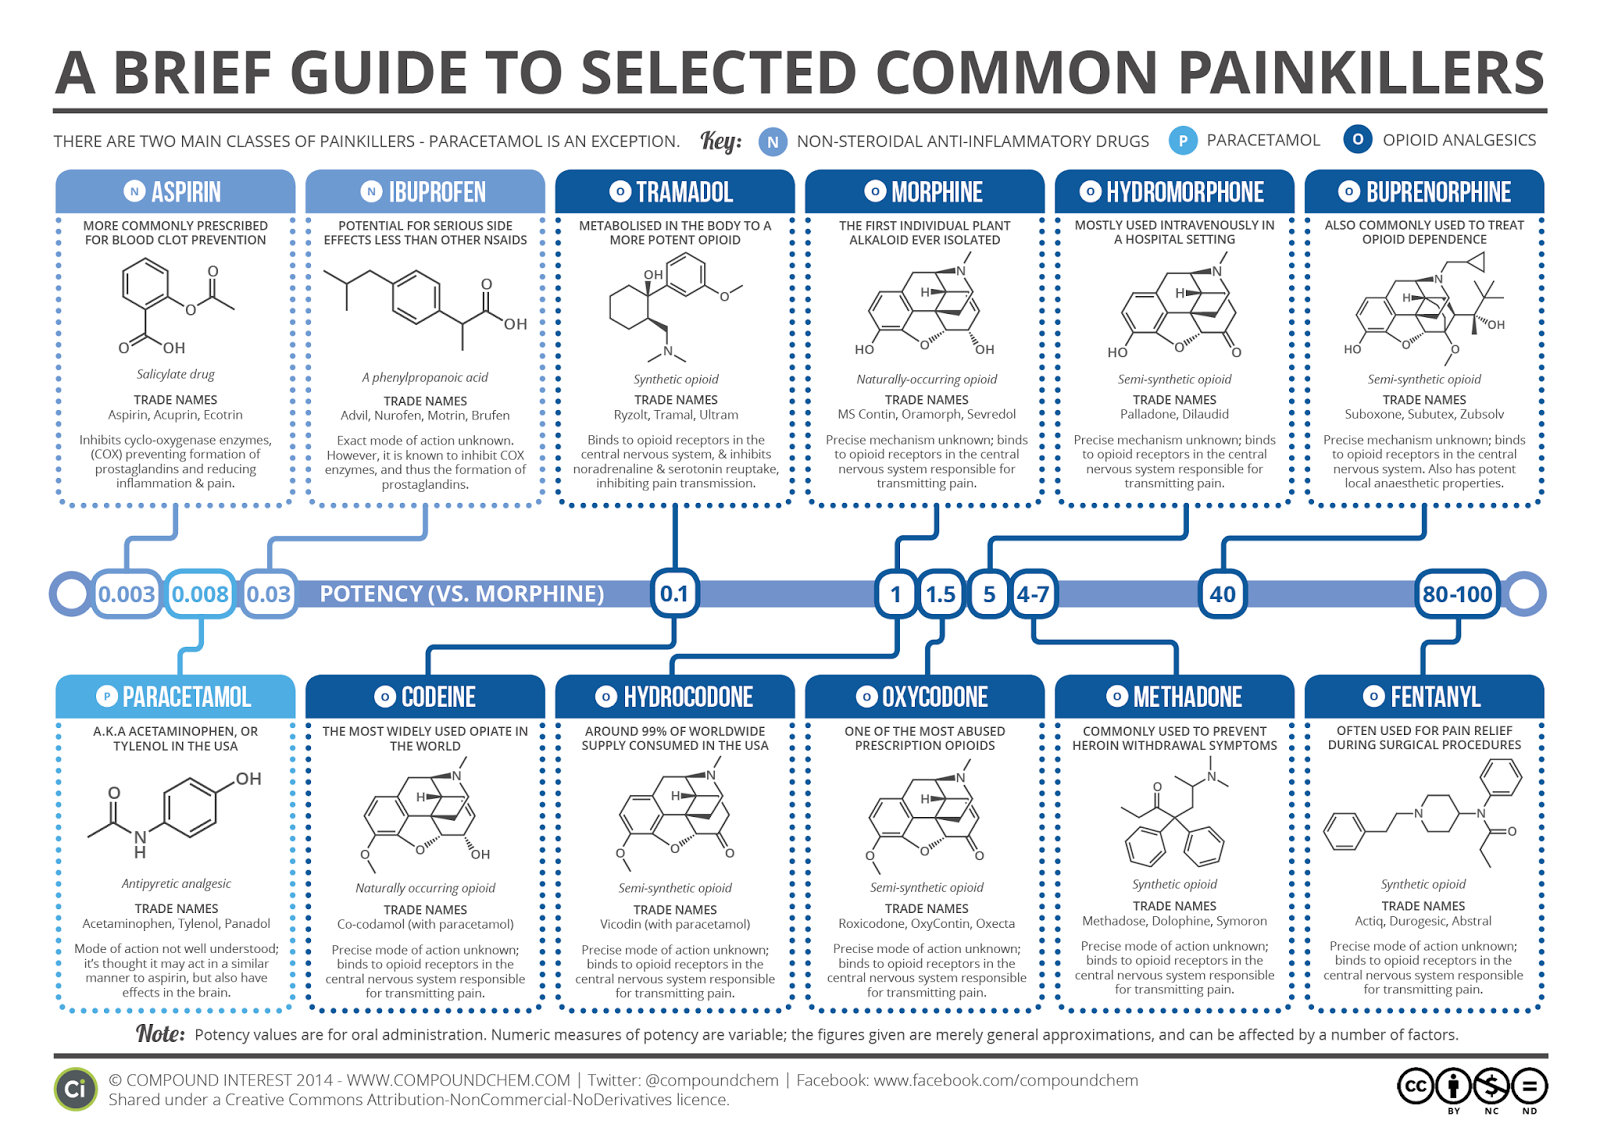 http://www.compoundchem.com/wp-content/uploads/2014/09/Brief-Guide-to-Common-Painkillers-Oct-14.png